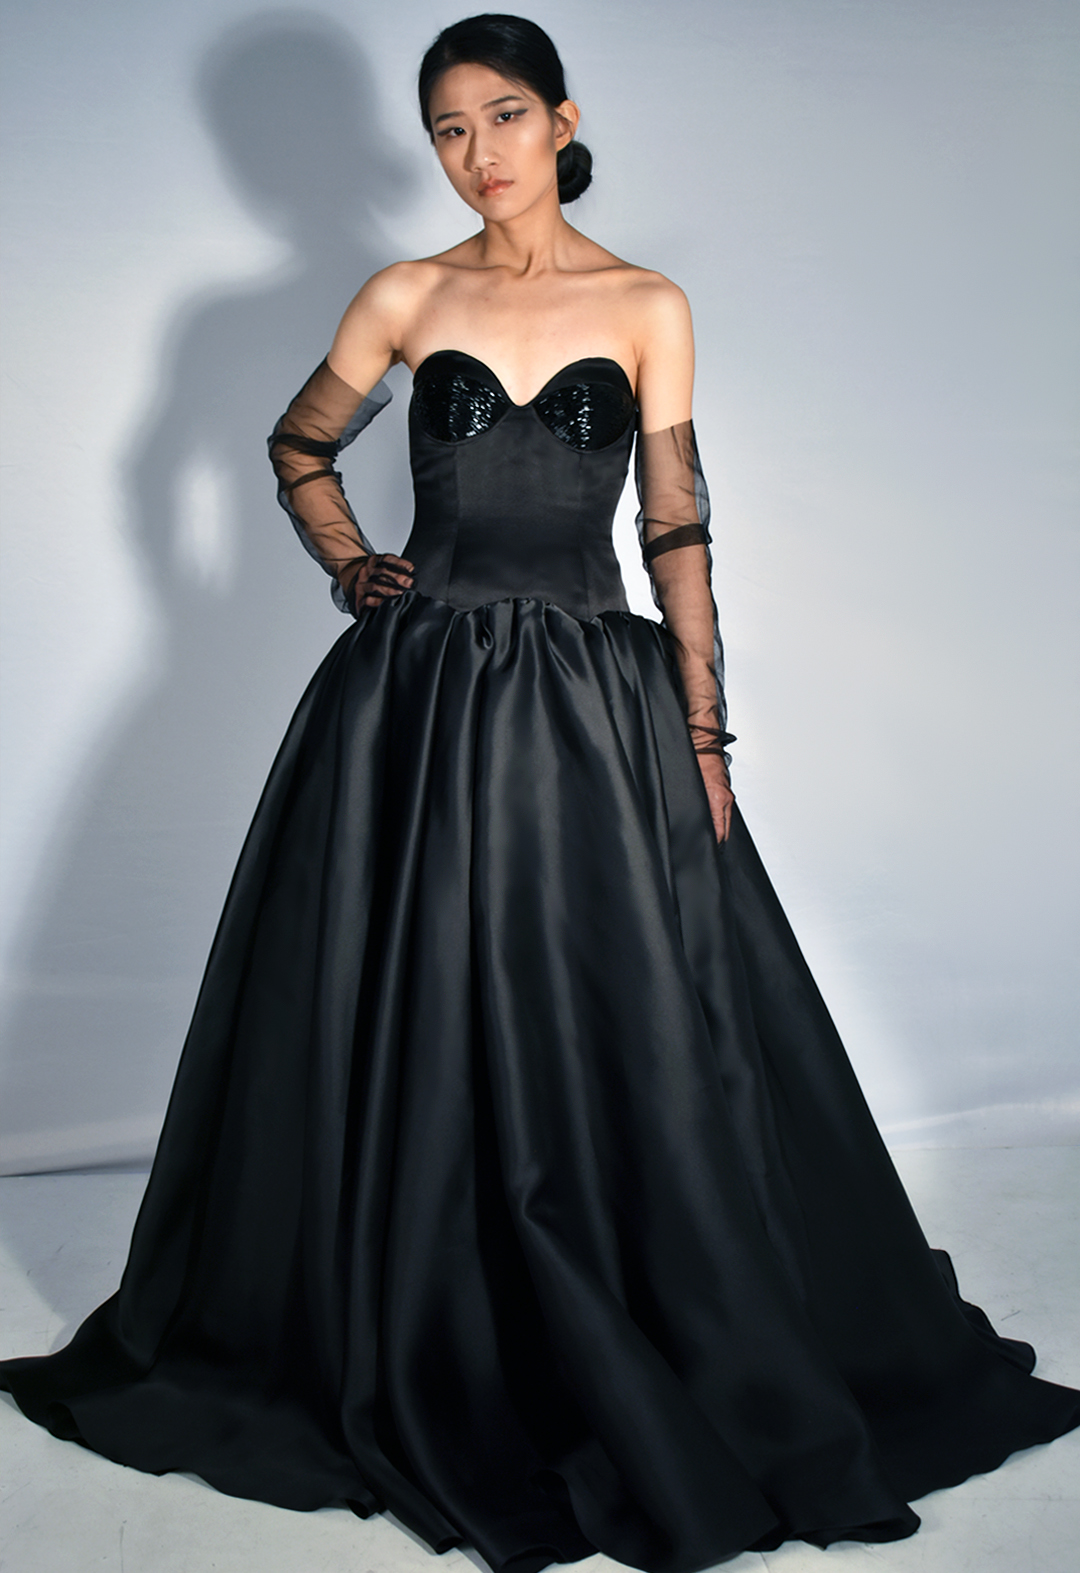 This black gown is made from 100 percent silk. The photo shows a front view of a woman wearing a black silk gown with beading covering three-quarters of the bodice cups. The floor-length gown has a drop-waist duchesse satin bodice with cone-like satin-faced organza skirt panels gathered along the drop-waist, pooling onto the floor. The model is wearing black tulle gloves that cover three-quarters of her arms. Her face is facing the viewer, and she has one hand on her hip. The background is white.